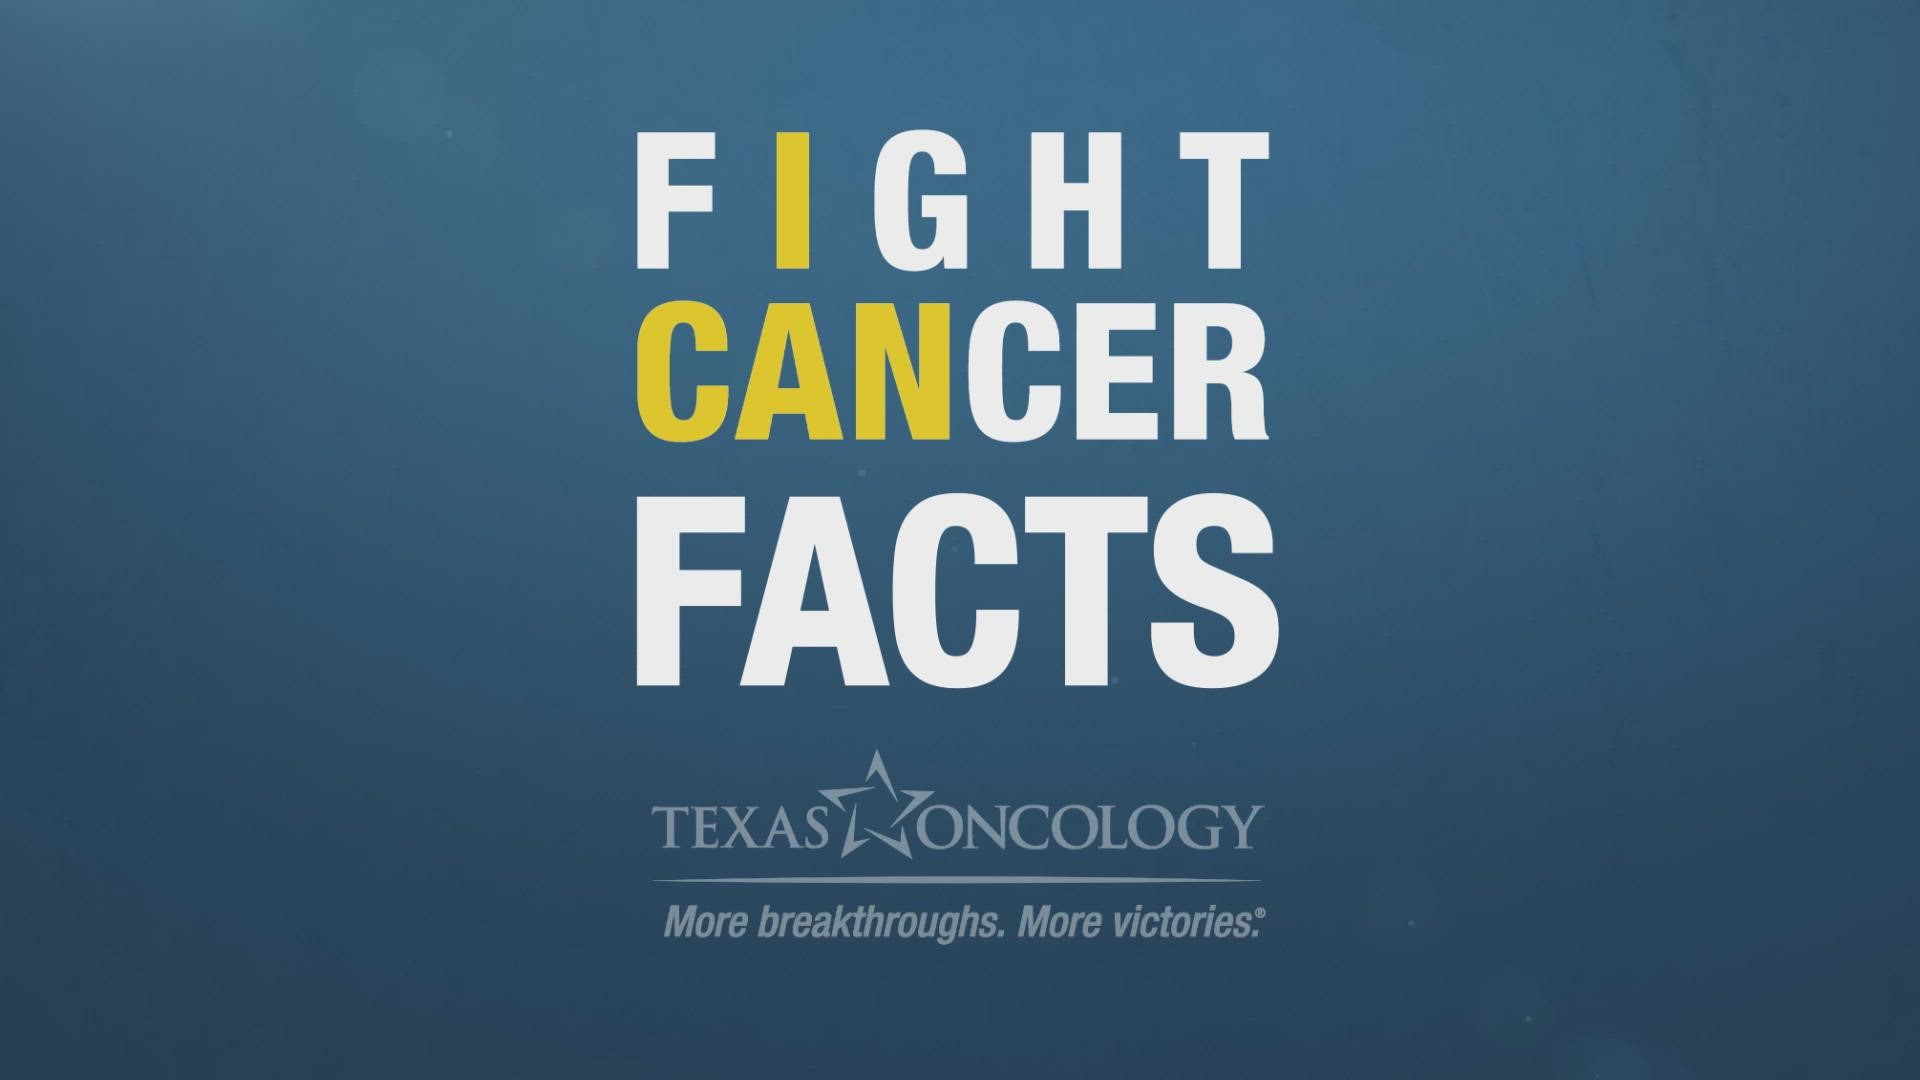 Local Texas Oncology doctor shares how to lower the risk of prostate cancer in men with early detection before it spreads.